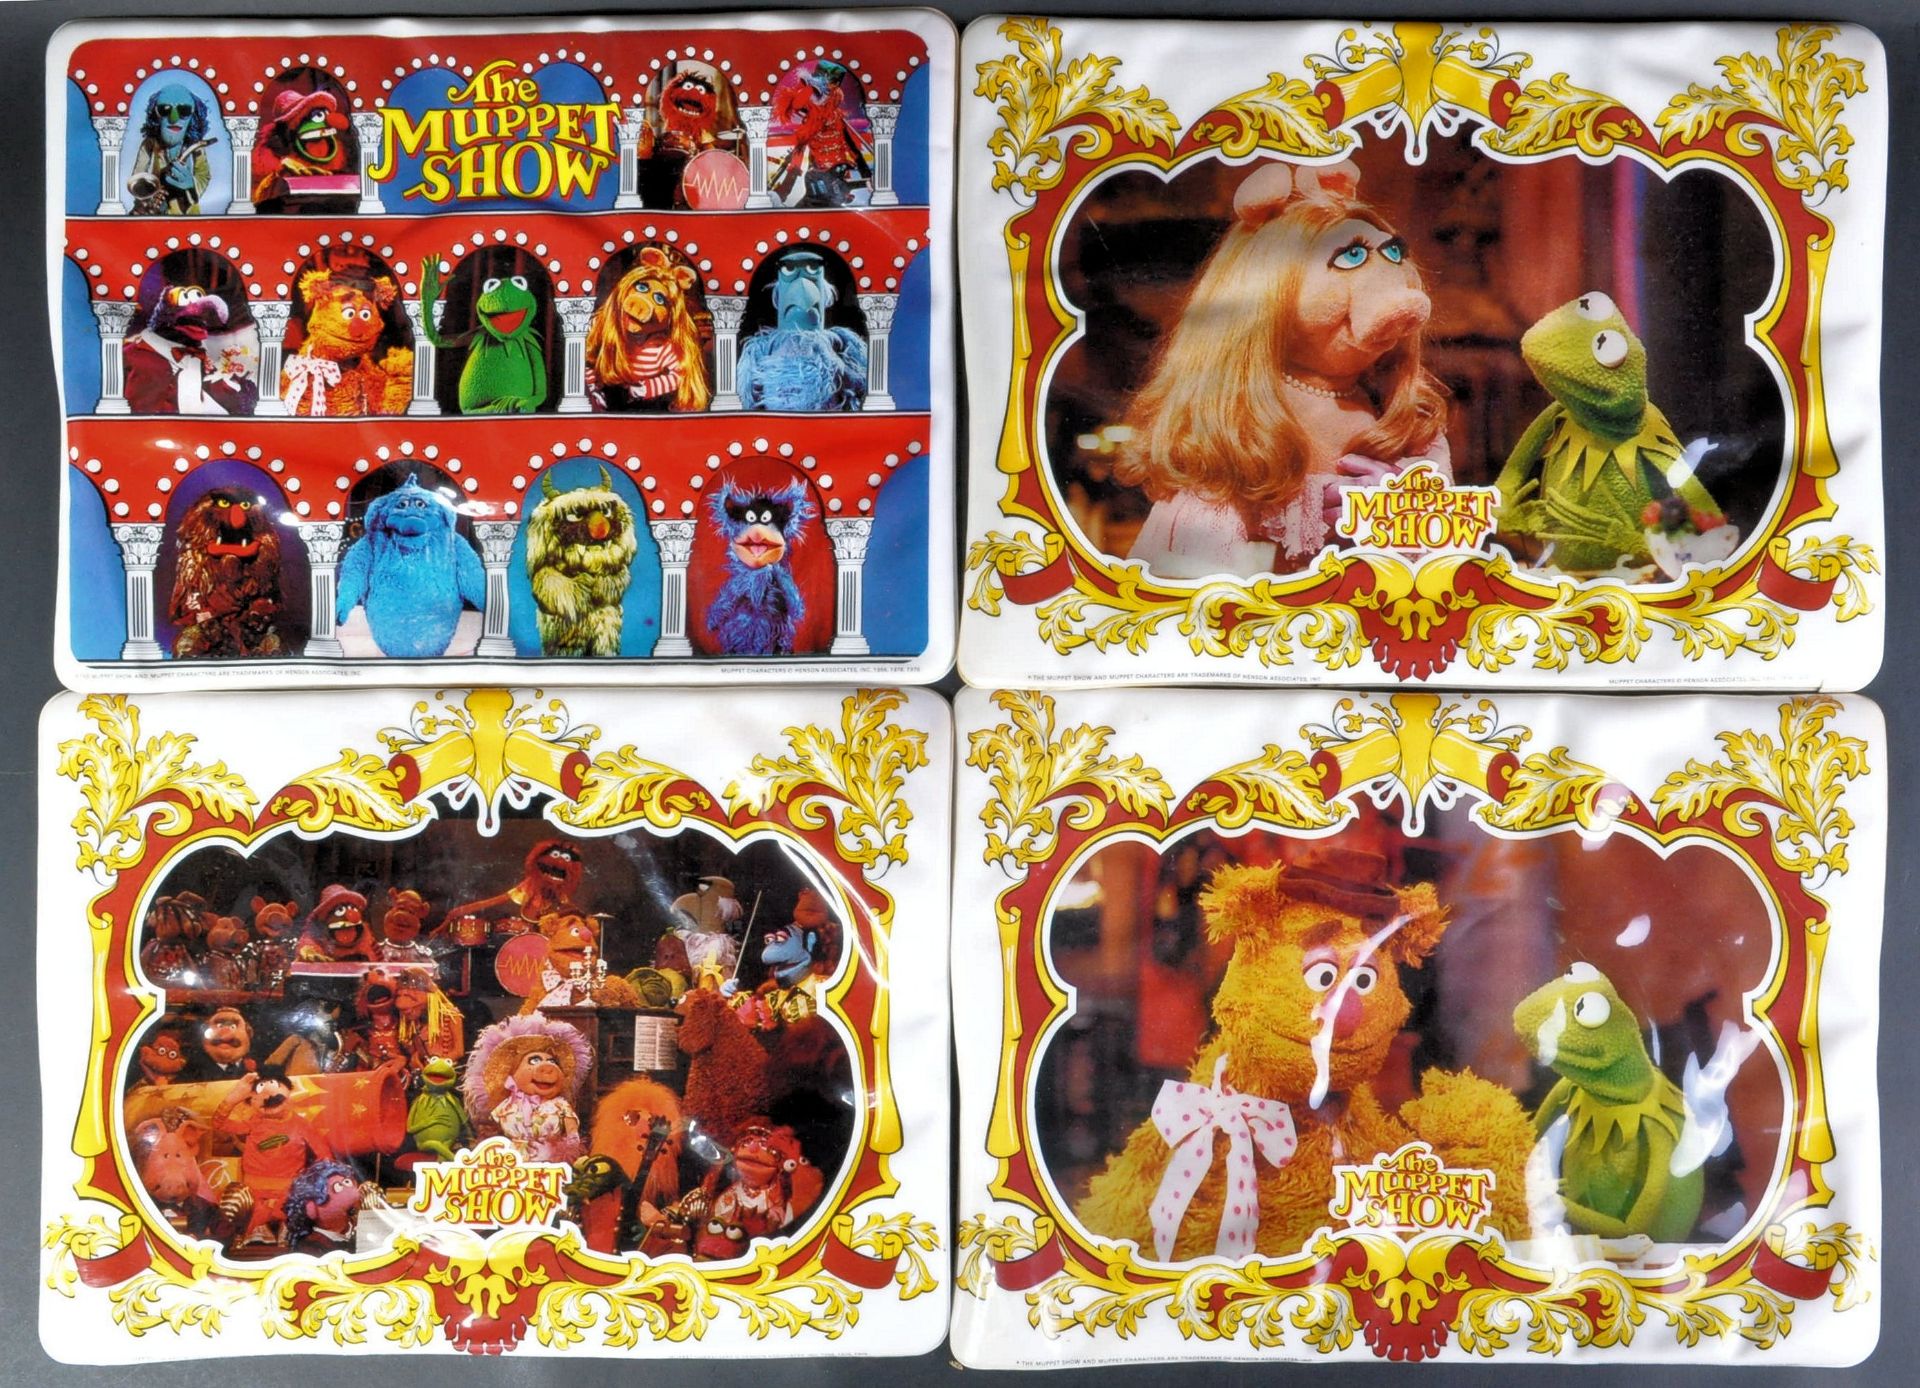 THE MUPPET SHOW - SET OF VINTAGE CHILDREN'S PLACEMATS